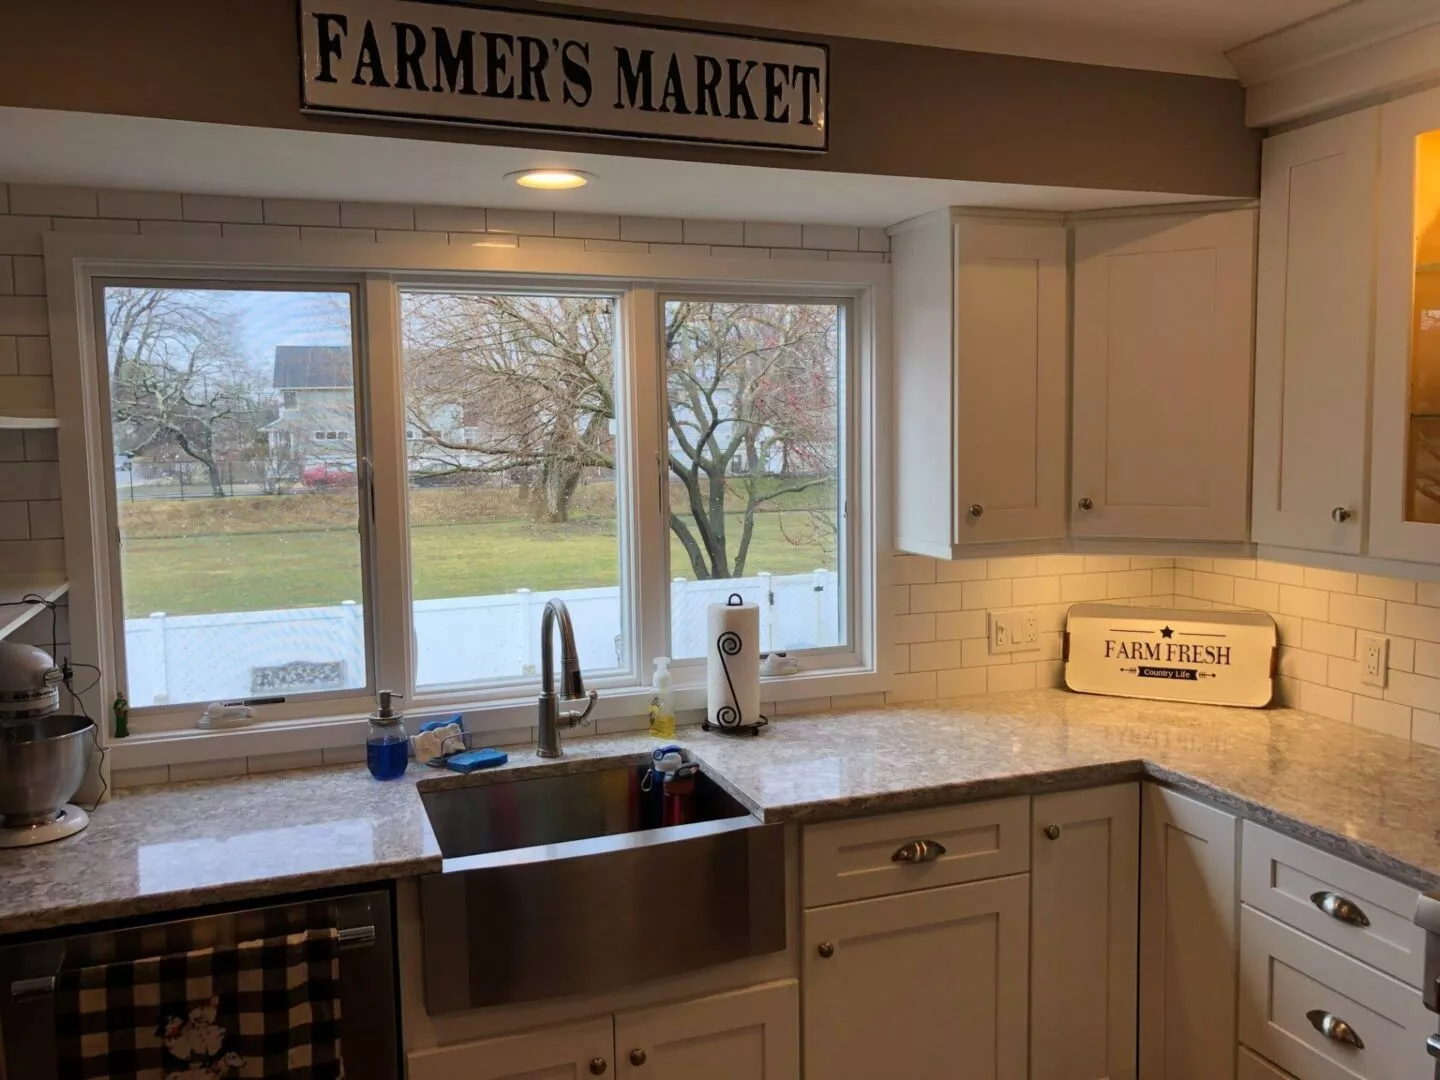 Farmer's Market printed on a board in a kitchen